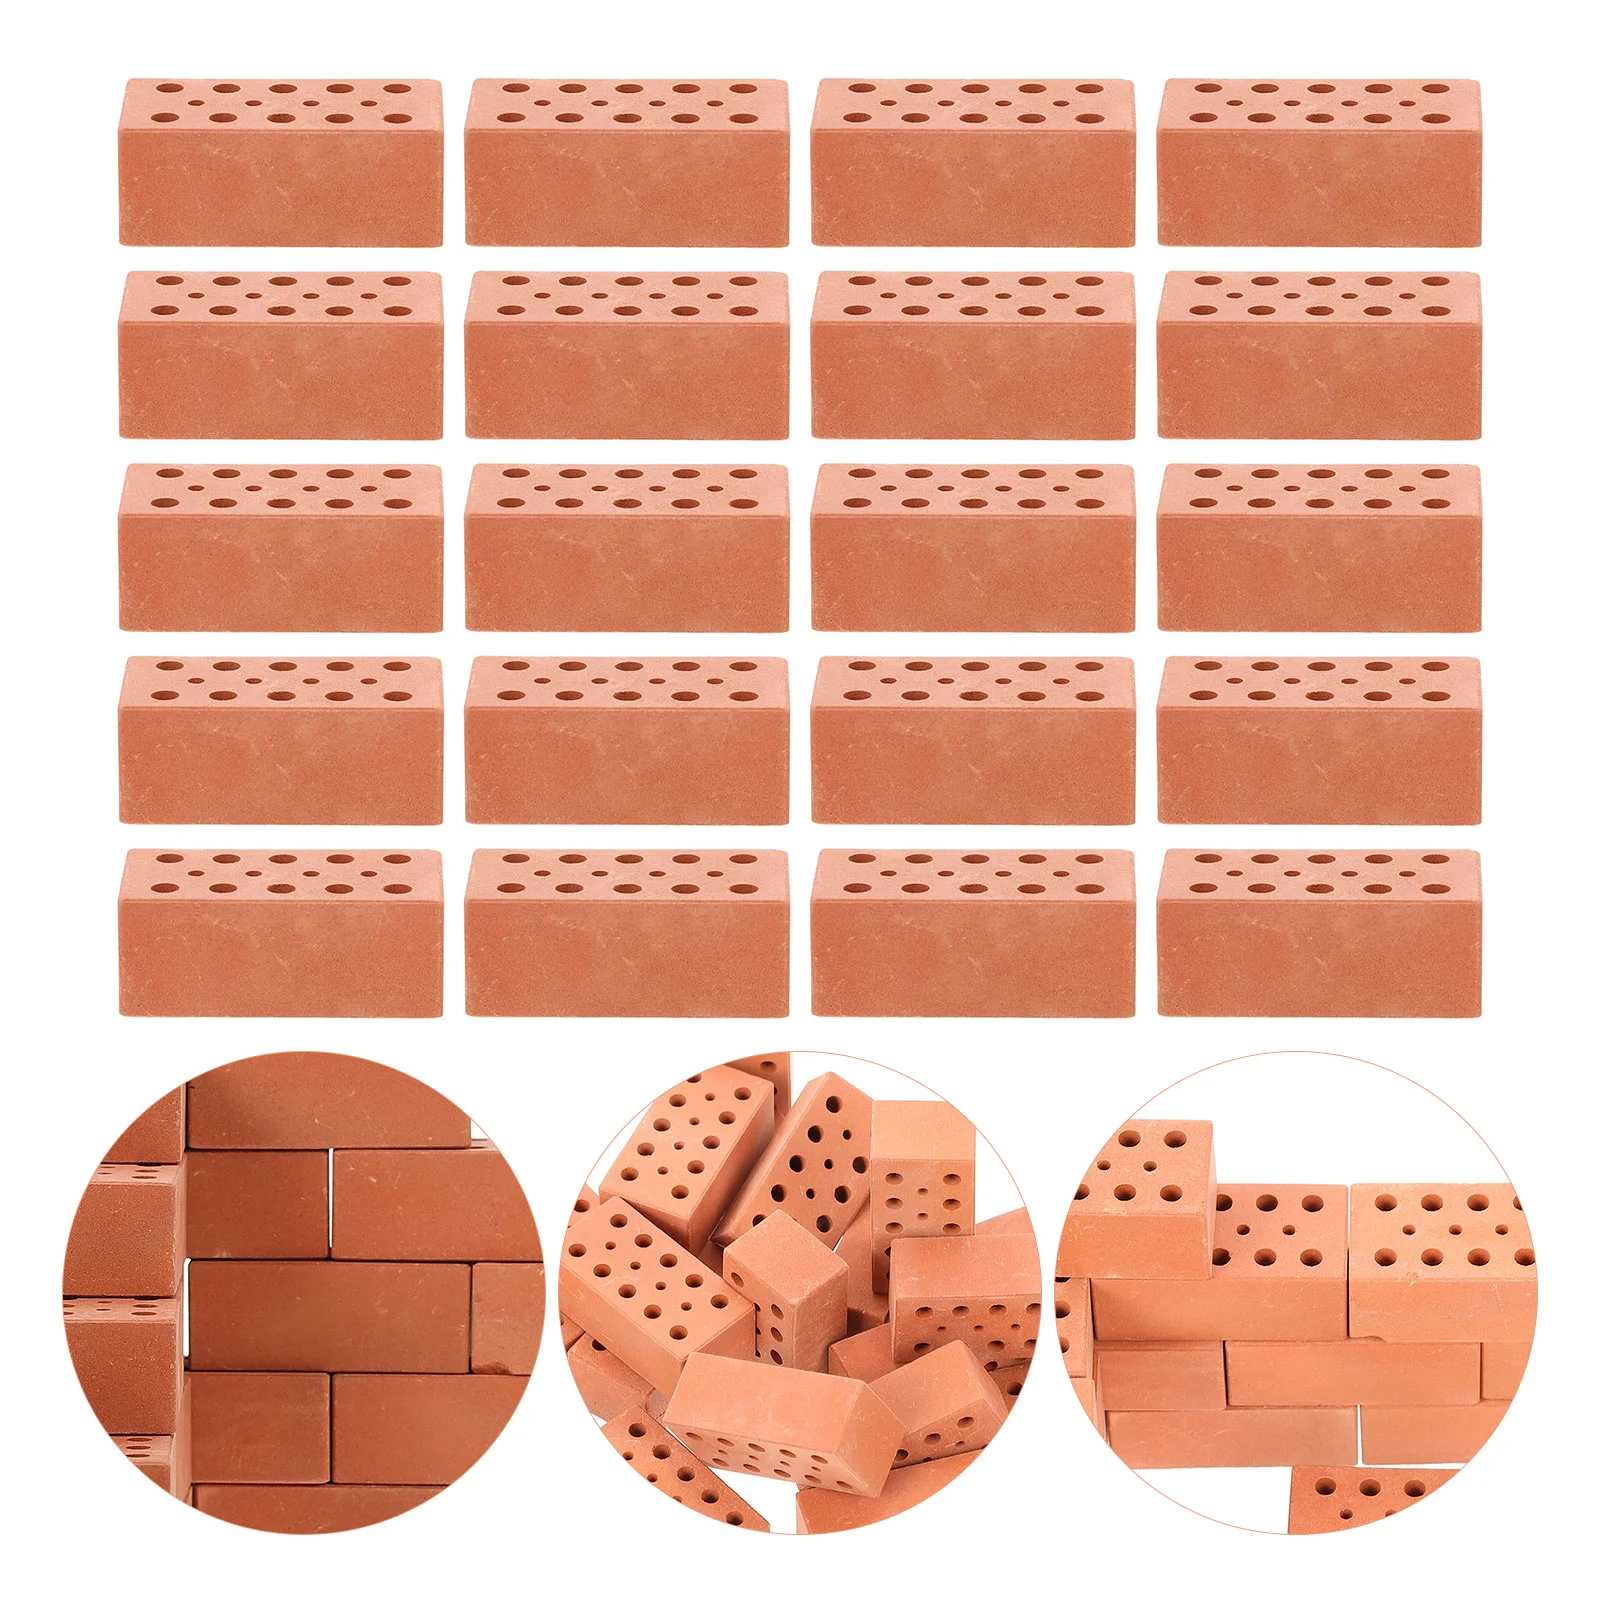 

20 Pcs Decorate Simulated Brick Child Toy Miniature Bricks Figurine Clay Play House Props